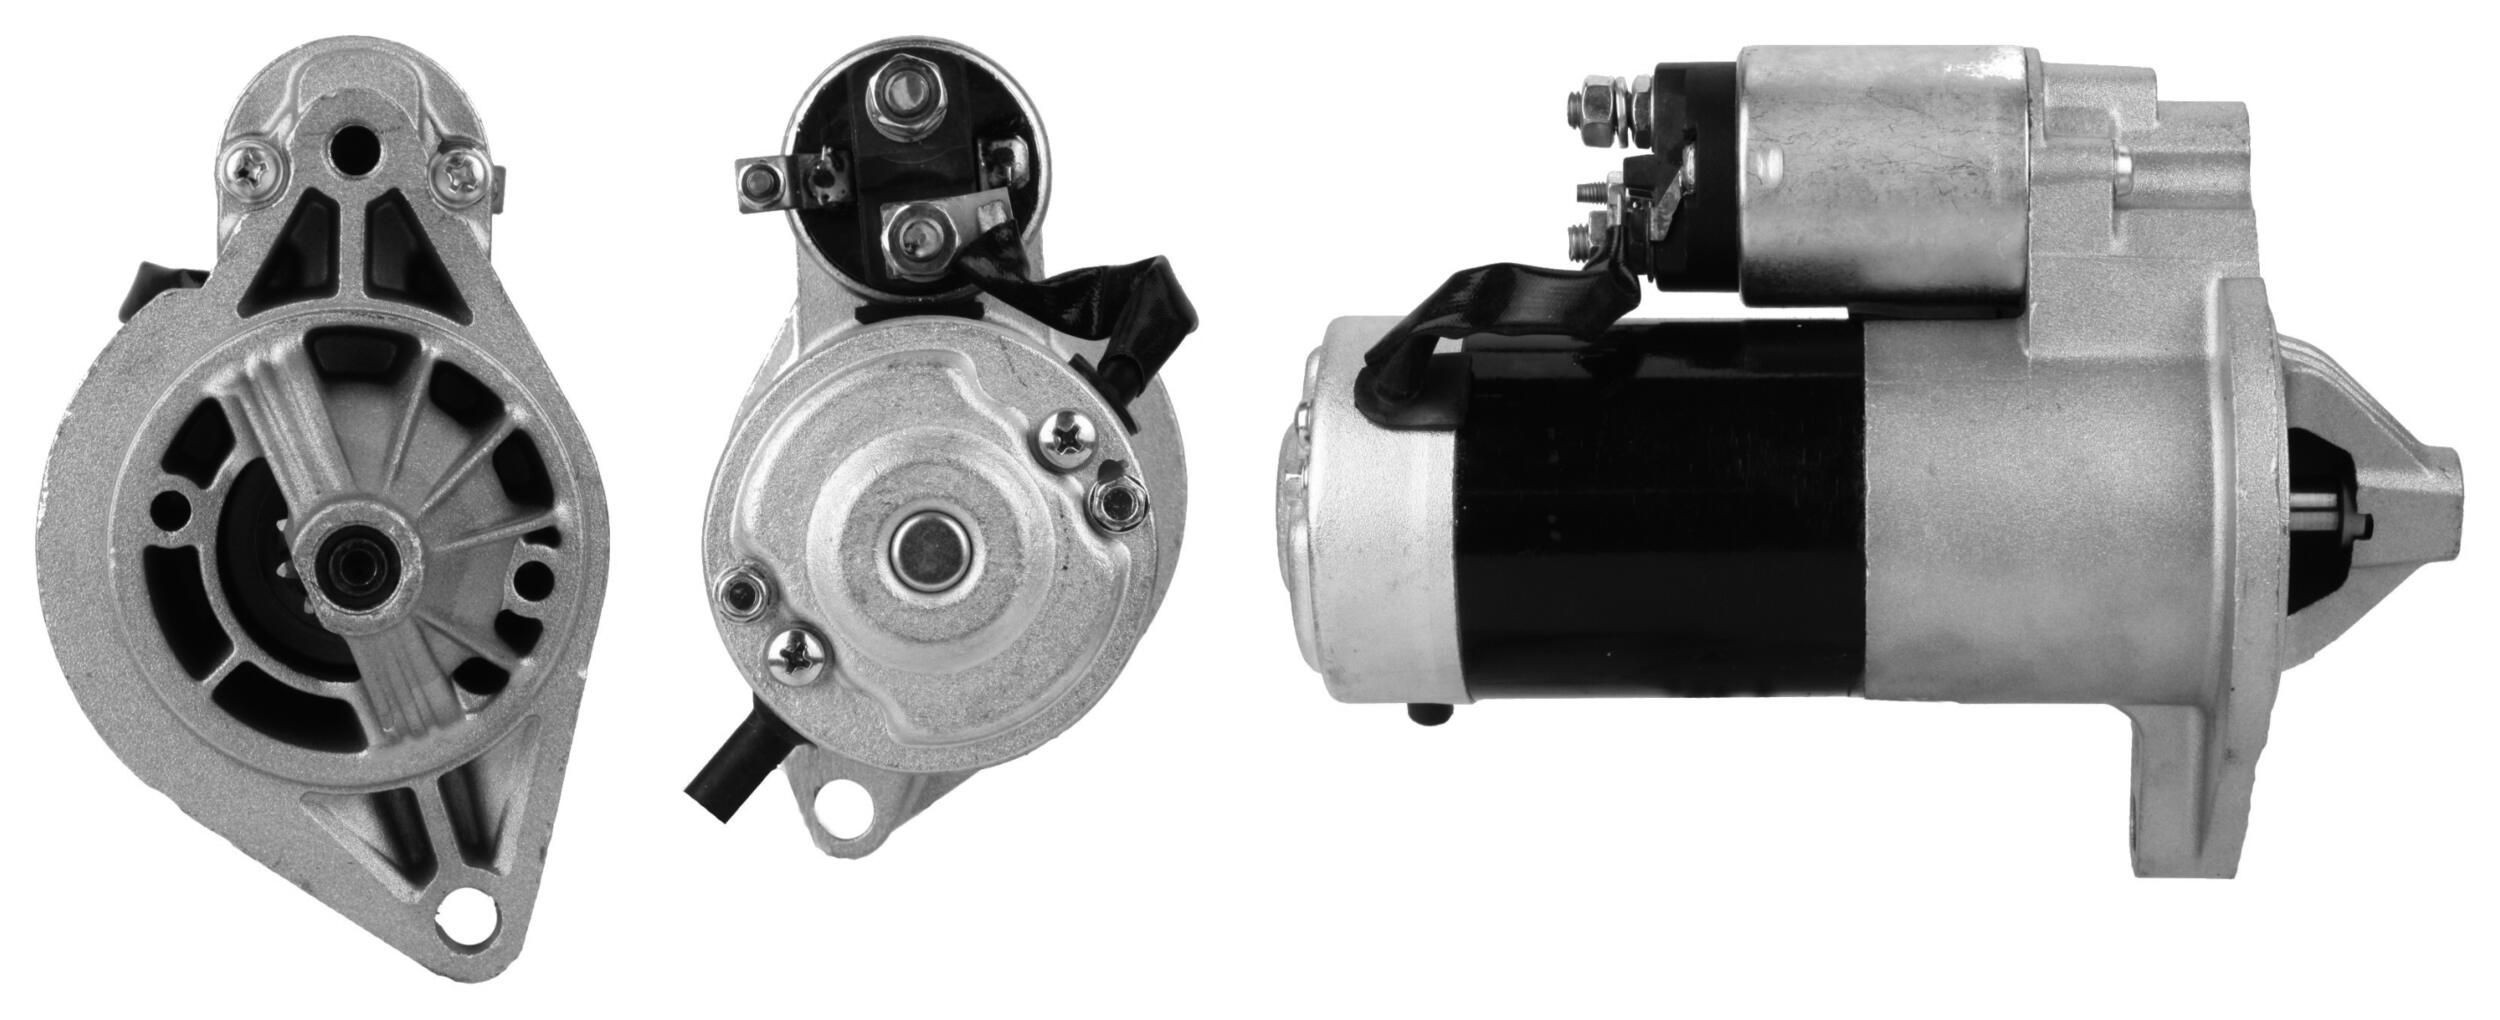 ELSTOCK 25-2042 Starter motor JEEP experience and price